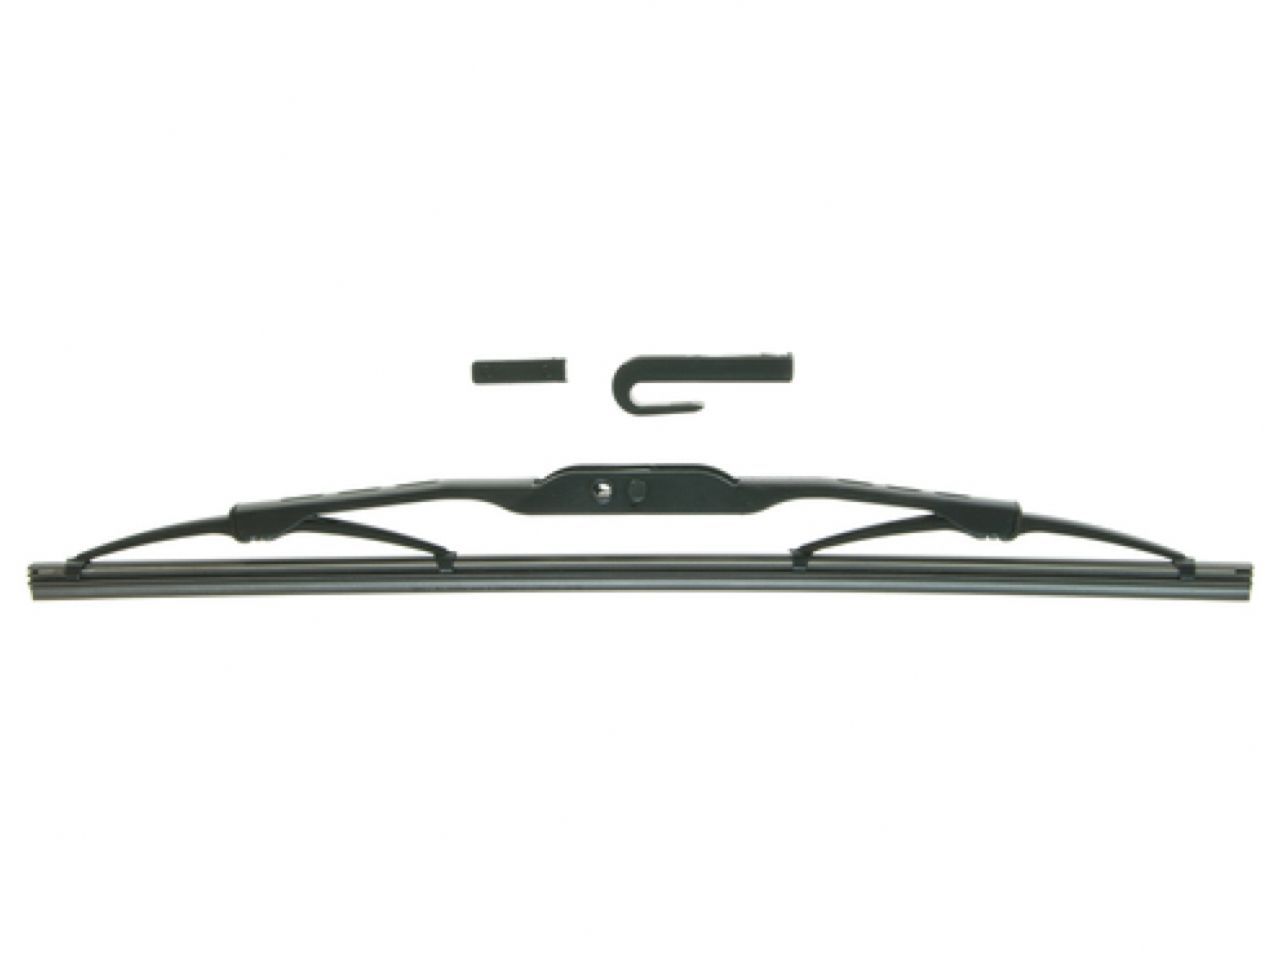 Anco Windshield Wipers 31-14 Item Image